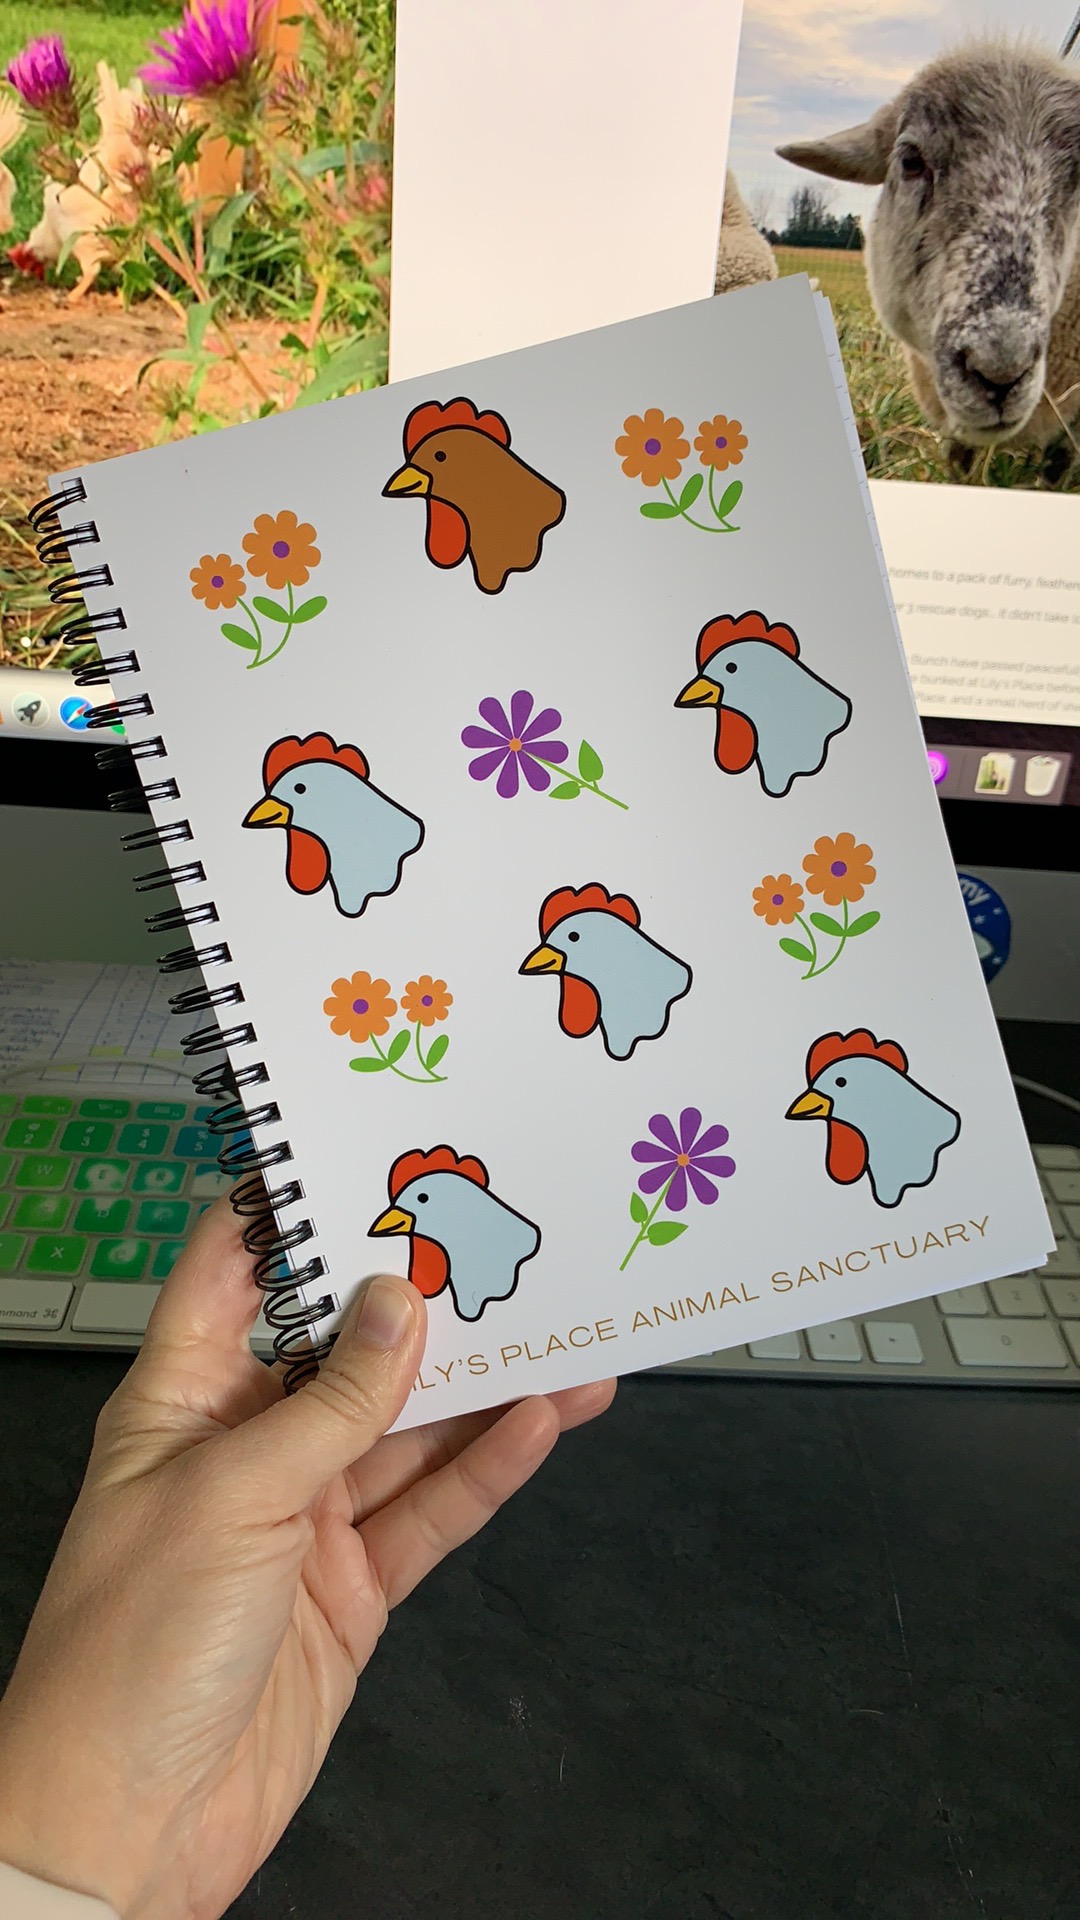 Hens and wildflowers notebook - stationary with the chickens of Lily’s Place animal sanctuary